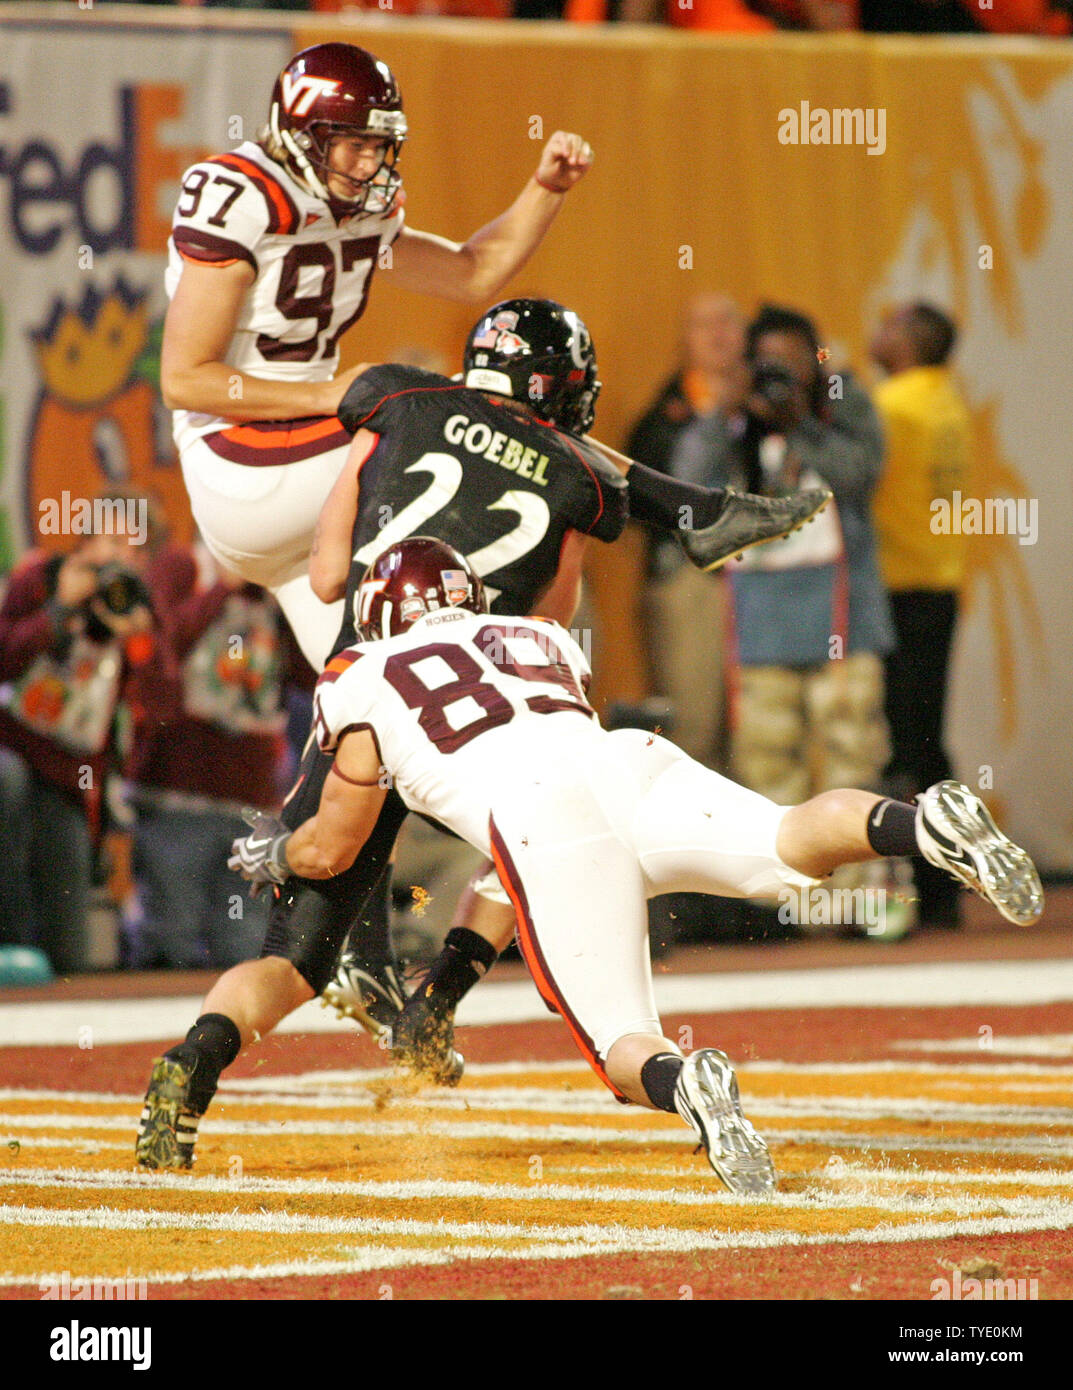 Cincinnati Bearcats' john Goebel (22) runs into Virginia Tech Hokies punter Brent Bowden (97) for a penalty in 4th quarter action at the 75th annual FedEx Orange Bowl game at Dolphin Stadium in Miami on January 1, 2009. (UPI Photo/Martin Fried) Stock Photo